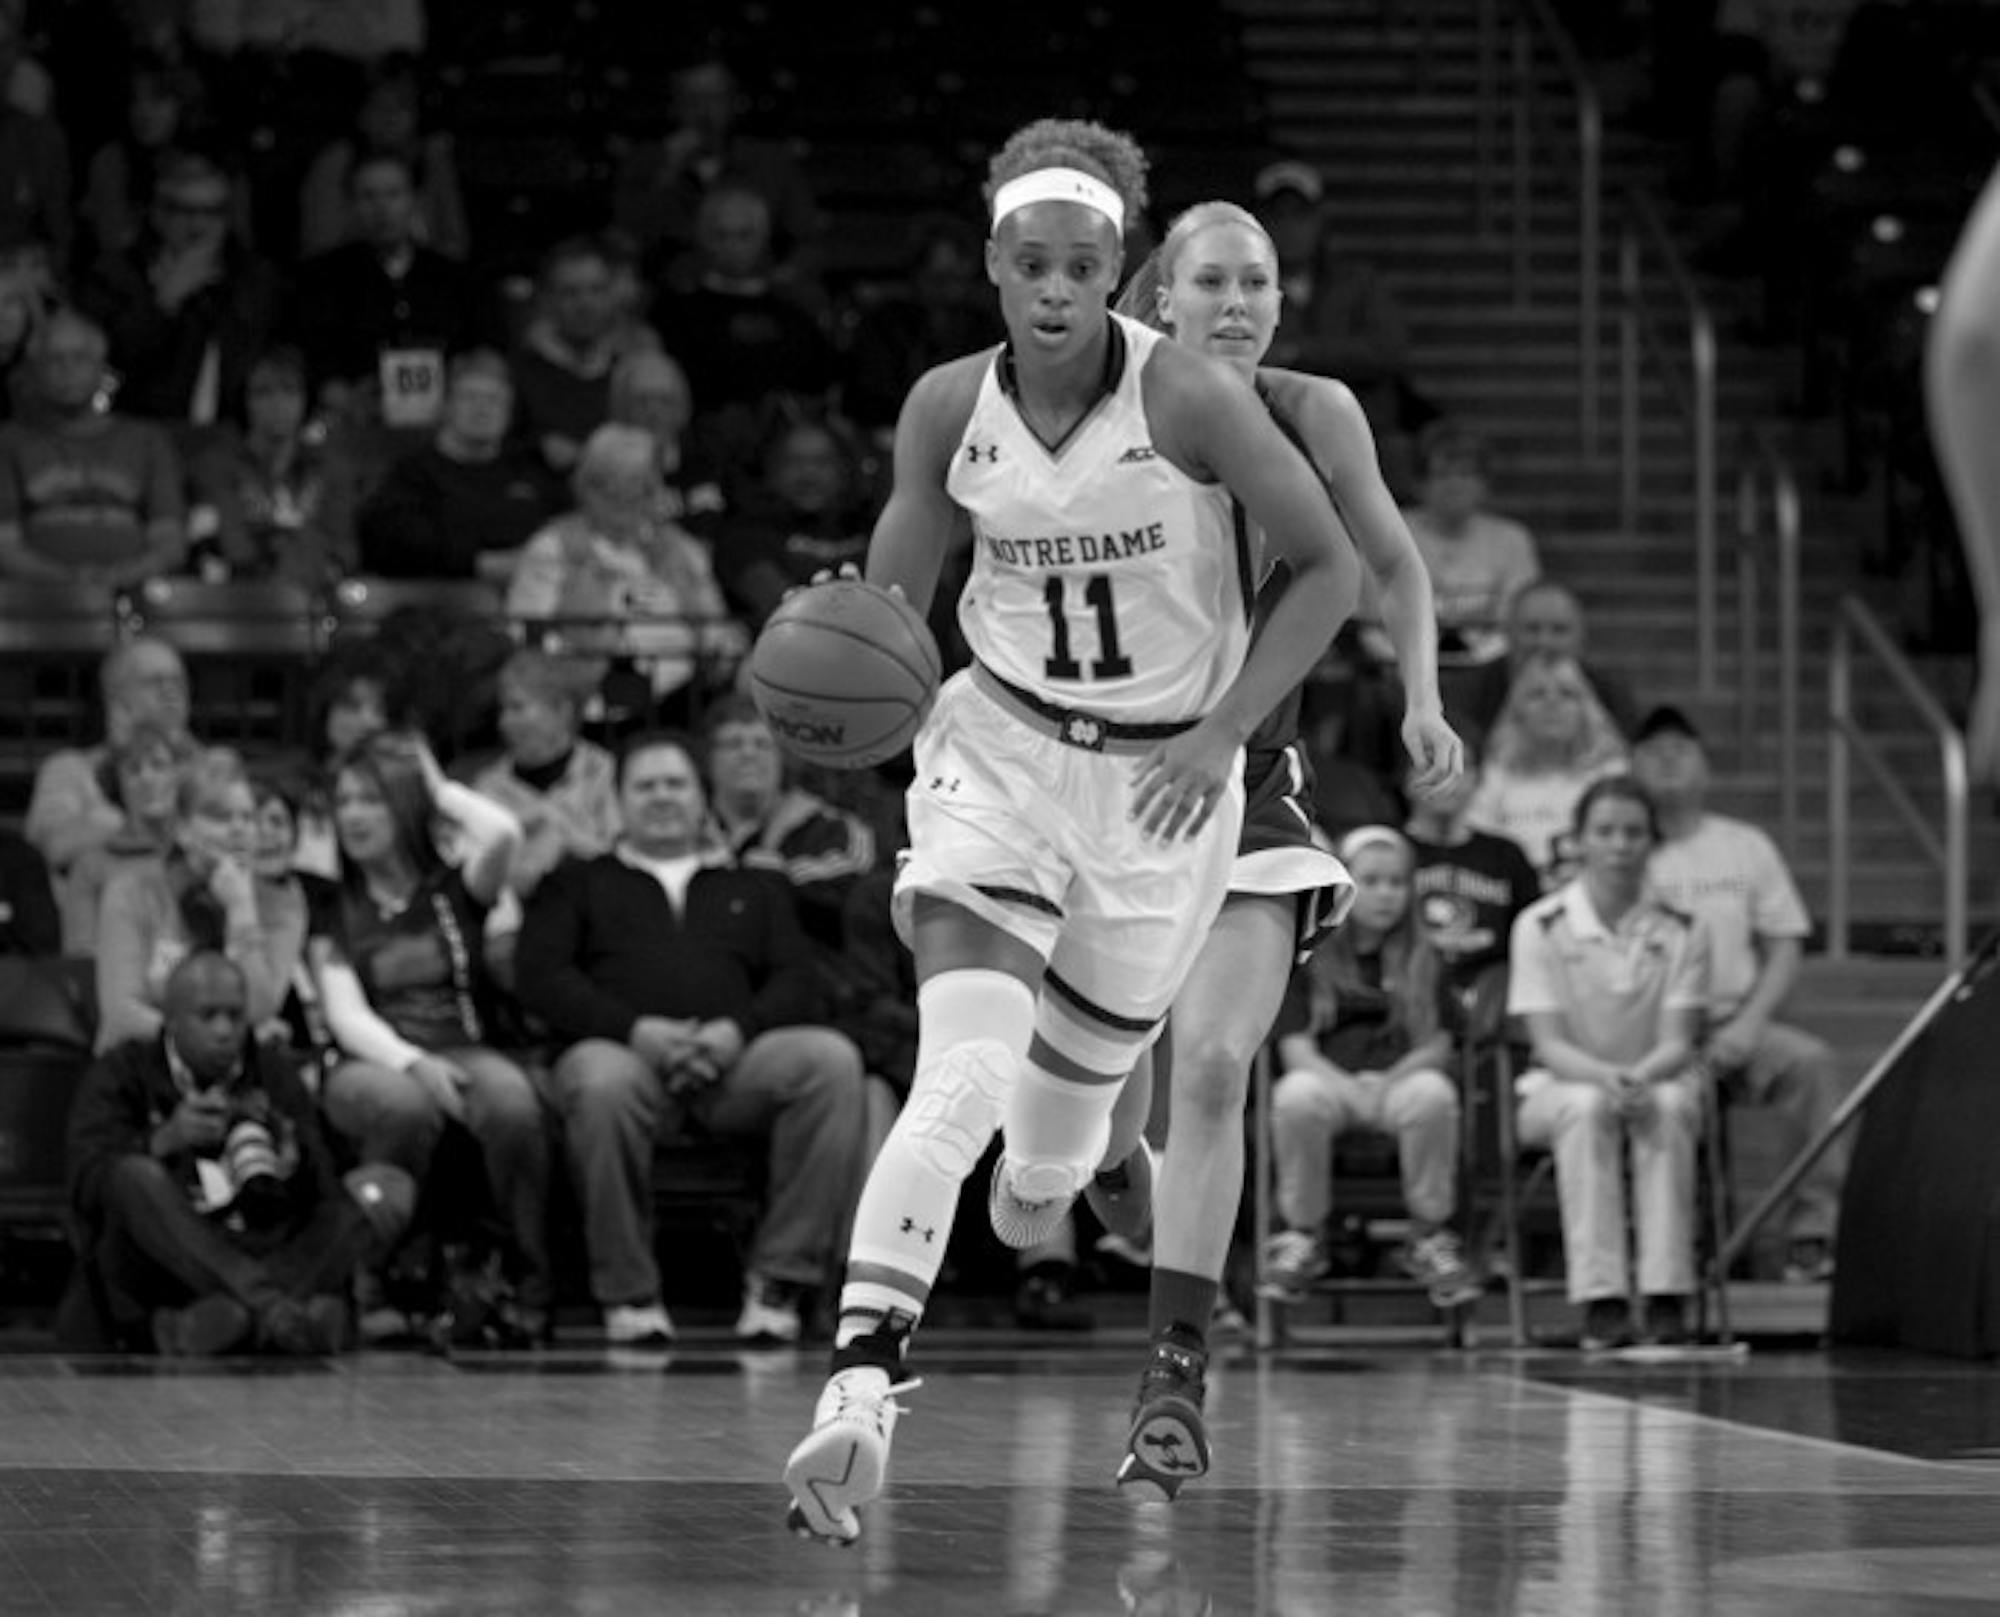 Notre Dame freshman forward Brianna Turner dribbles up the court during the 105-51 win over Massachusetts-Lowell on Nov. 14.